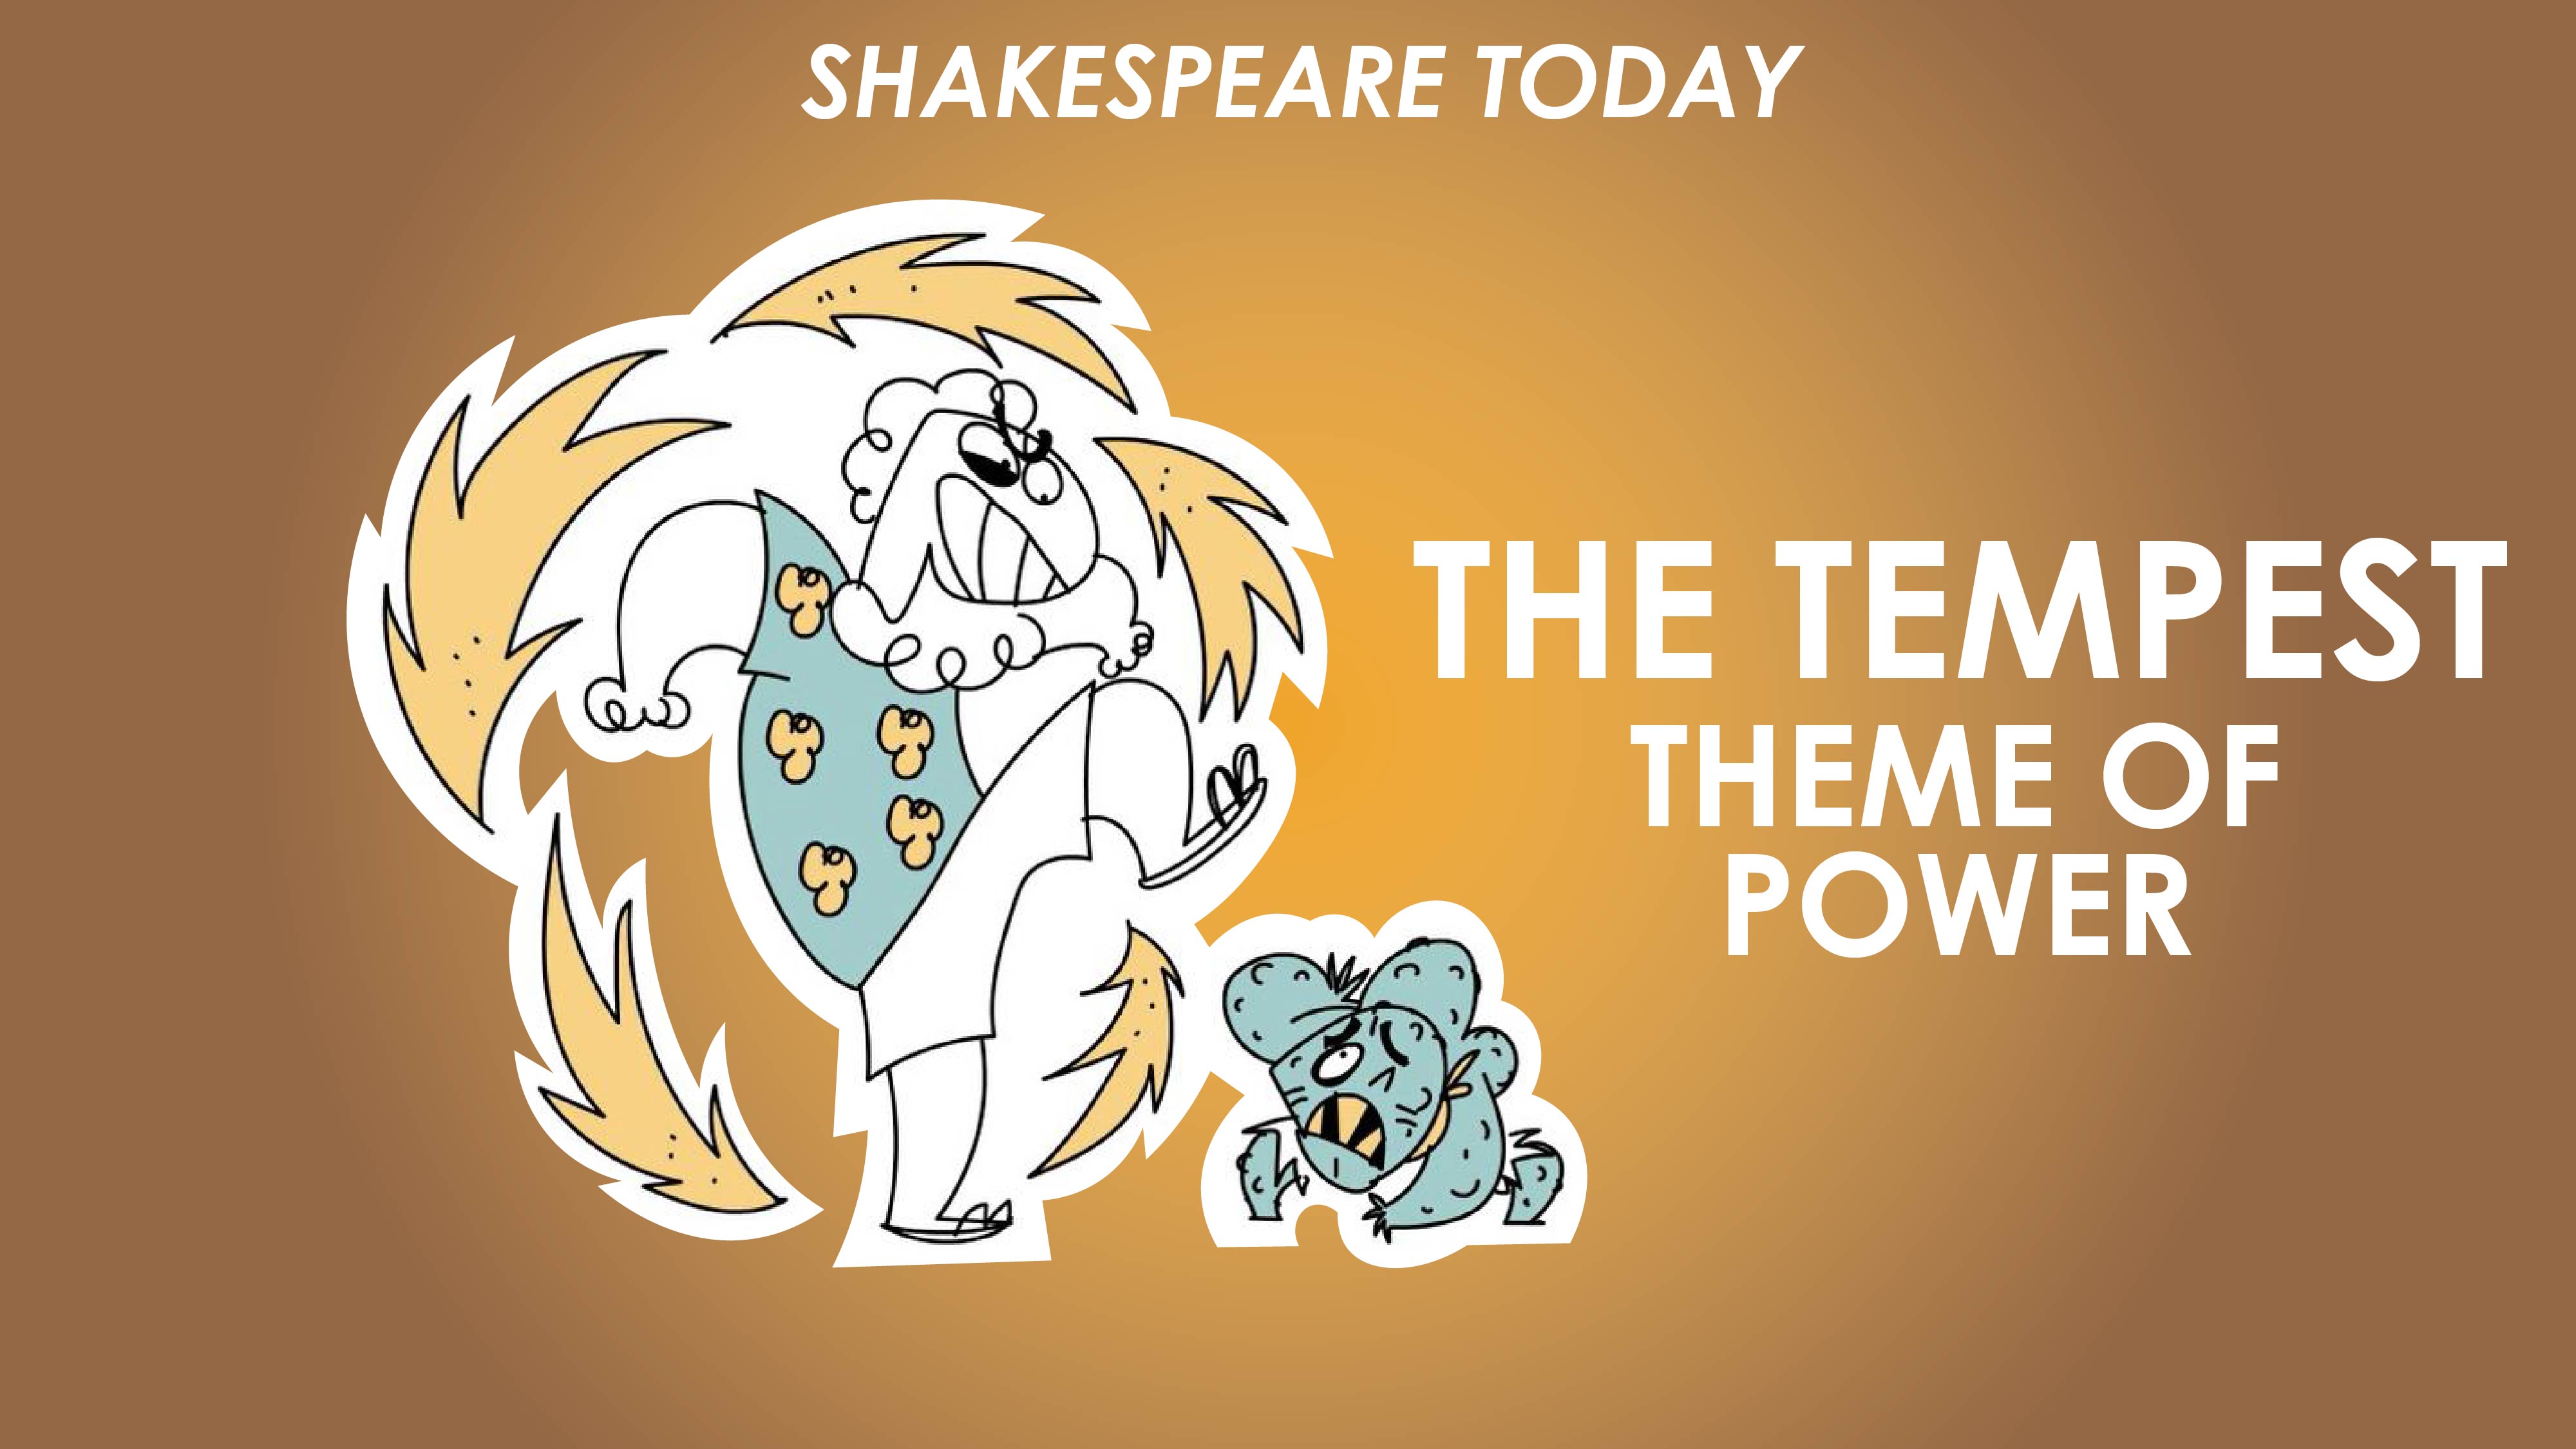 The Tempest Theme of Power - Shakespeare Today Series